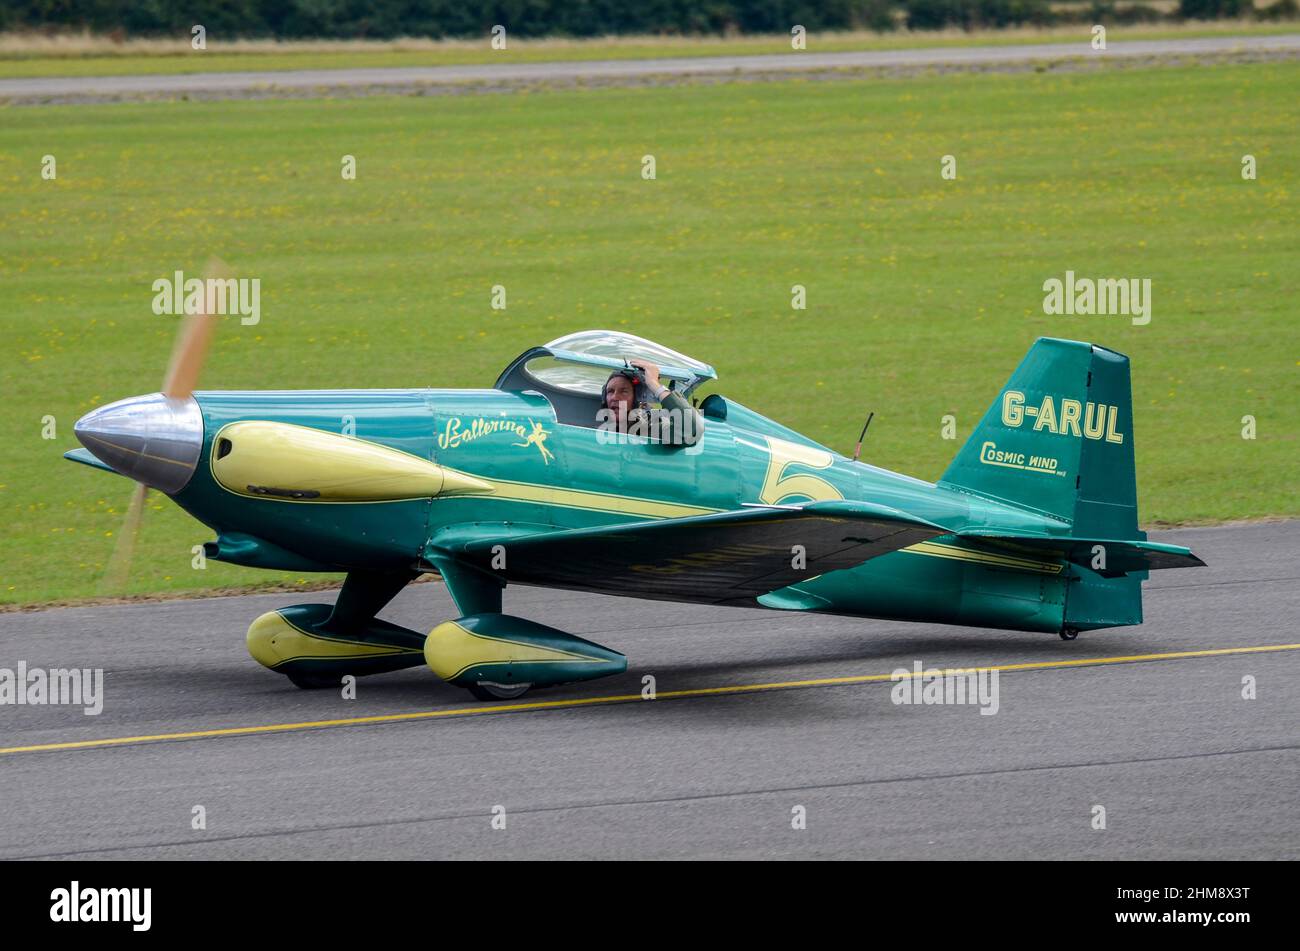 LeVier Cosmic Wind G-ARUL named Ballerina, a small single engine, single seat racing monoplane from the 1940s, taxiing at an airshow Stock Photo